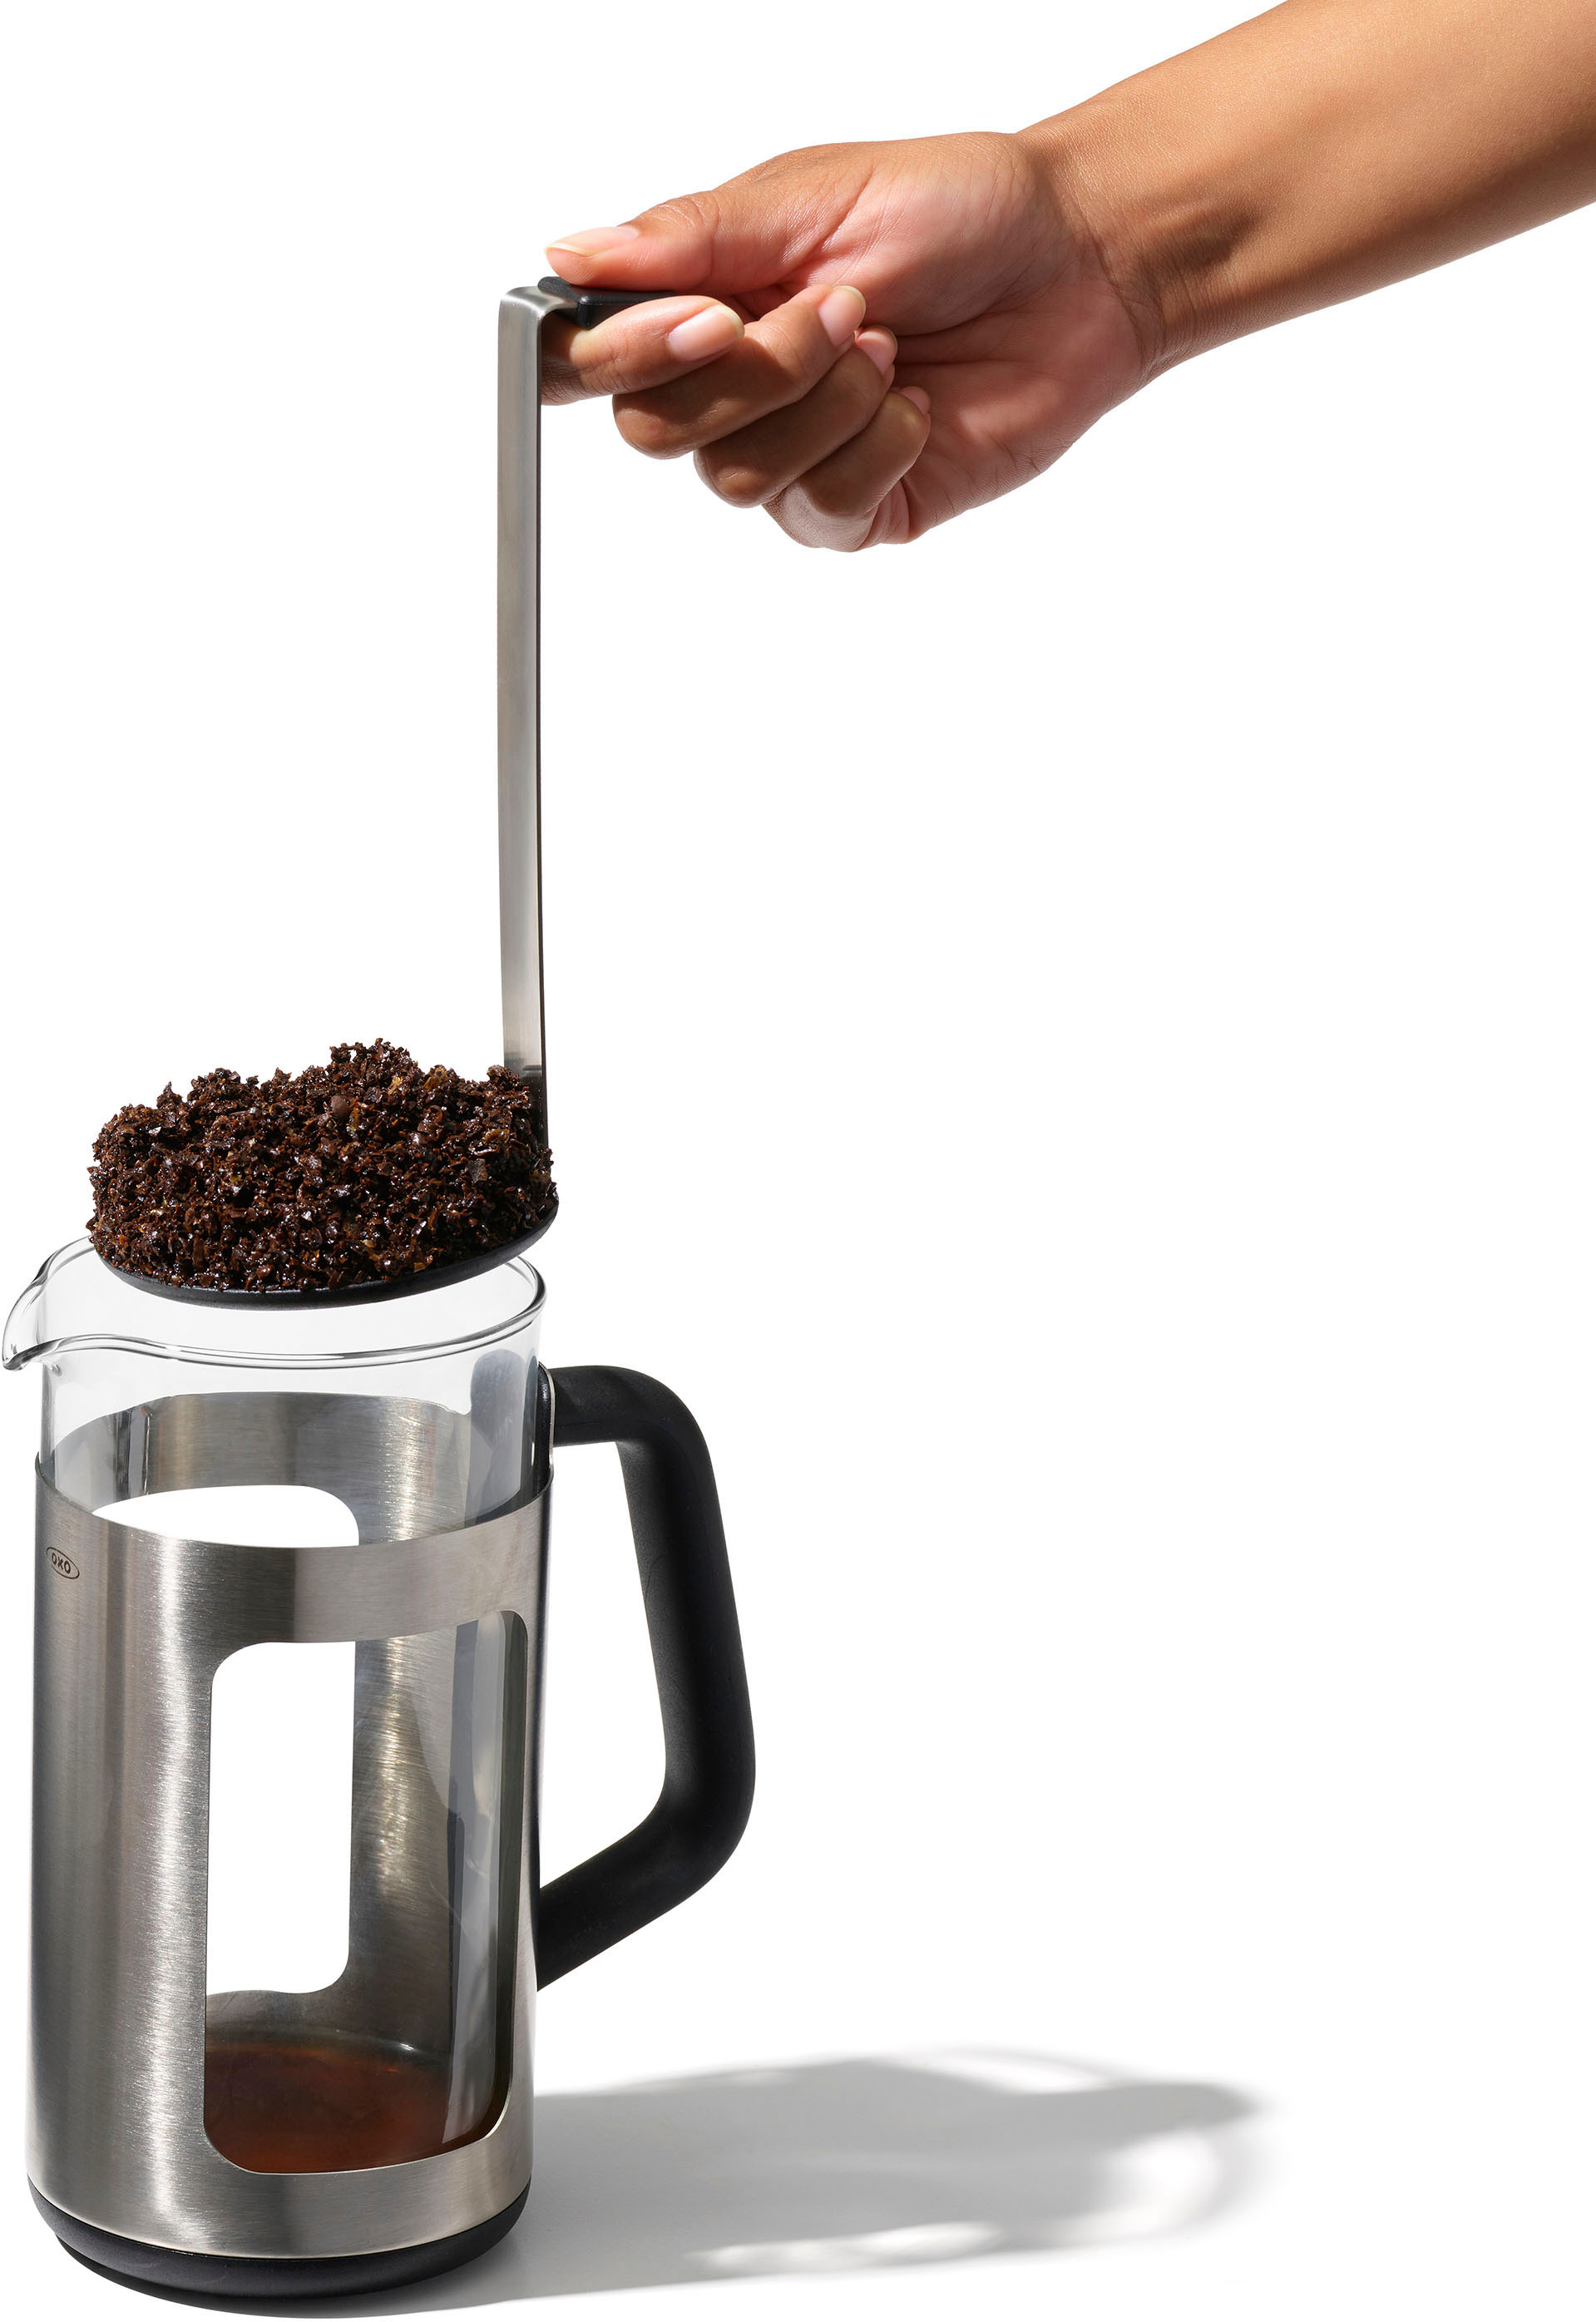 Brim 8-Cup French Press Coffee Maker Stainless Steel 50023 - Best Buy